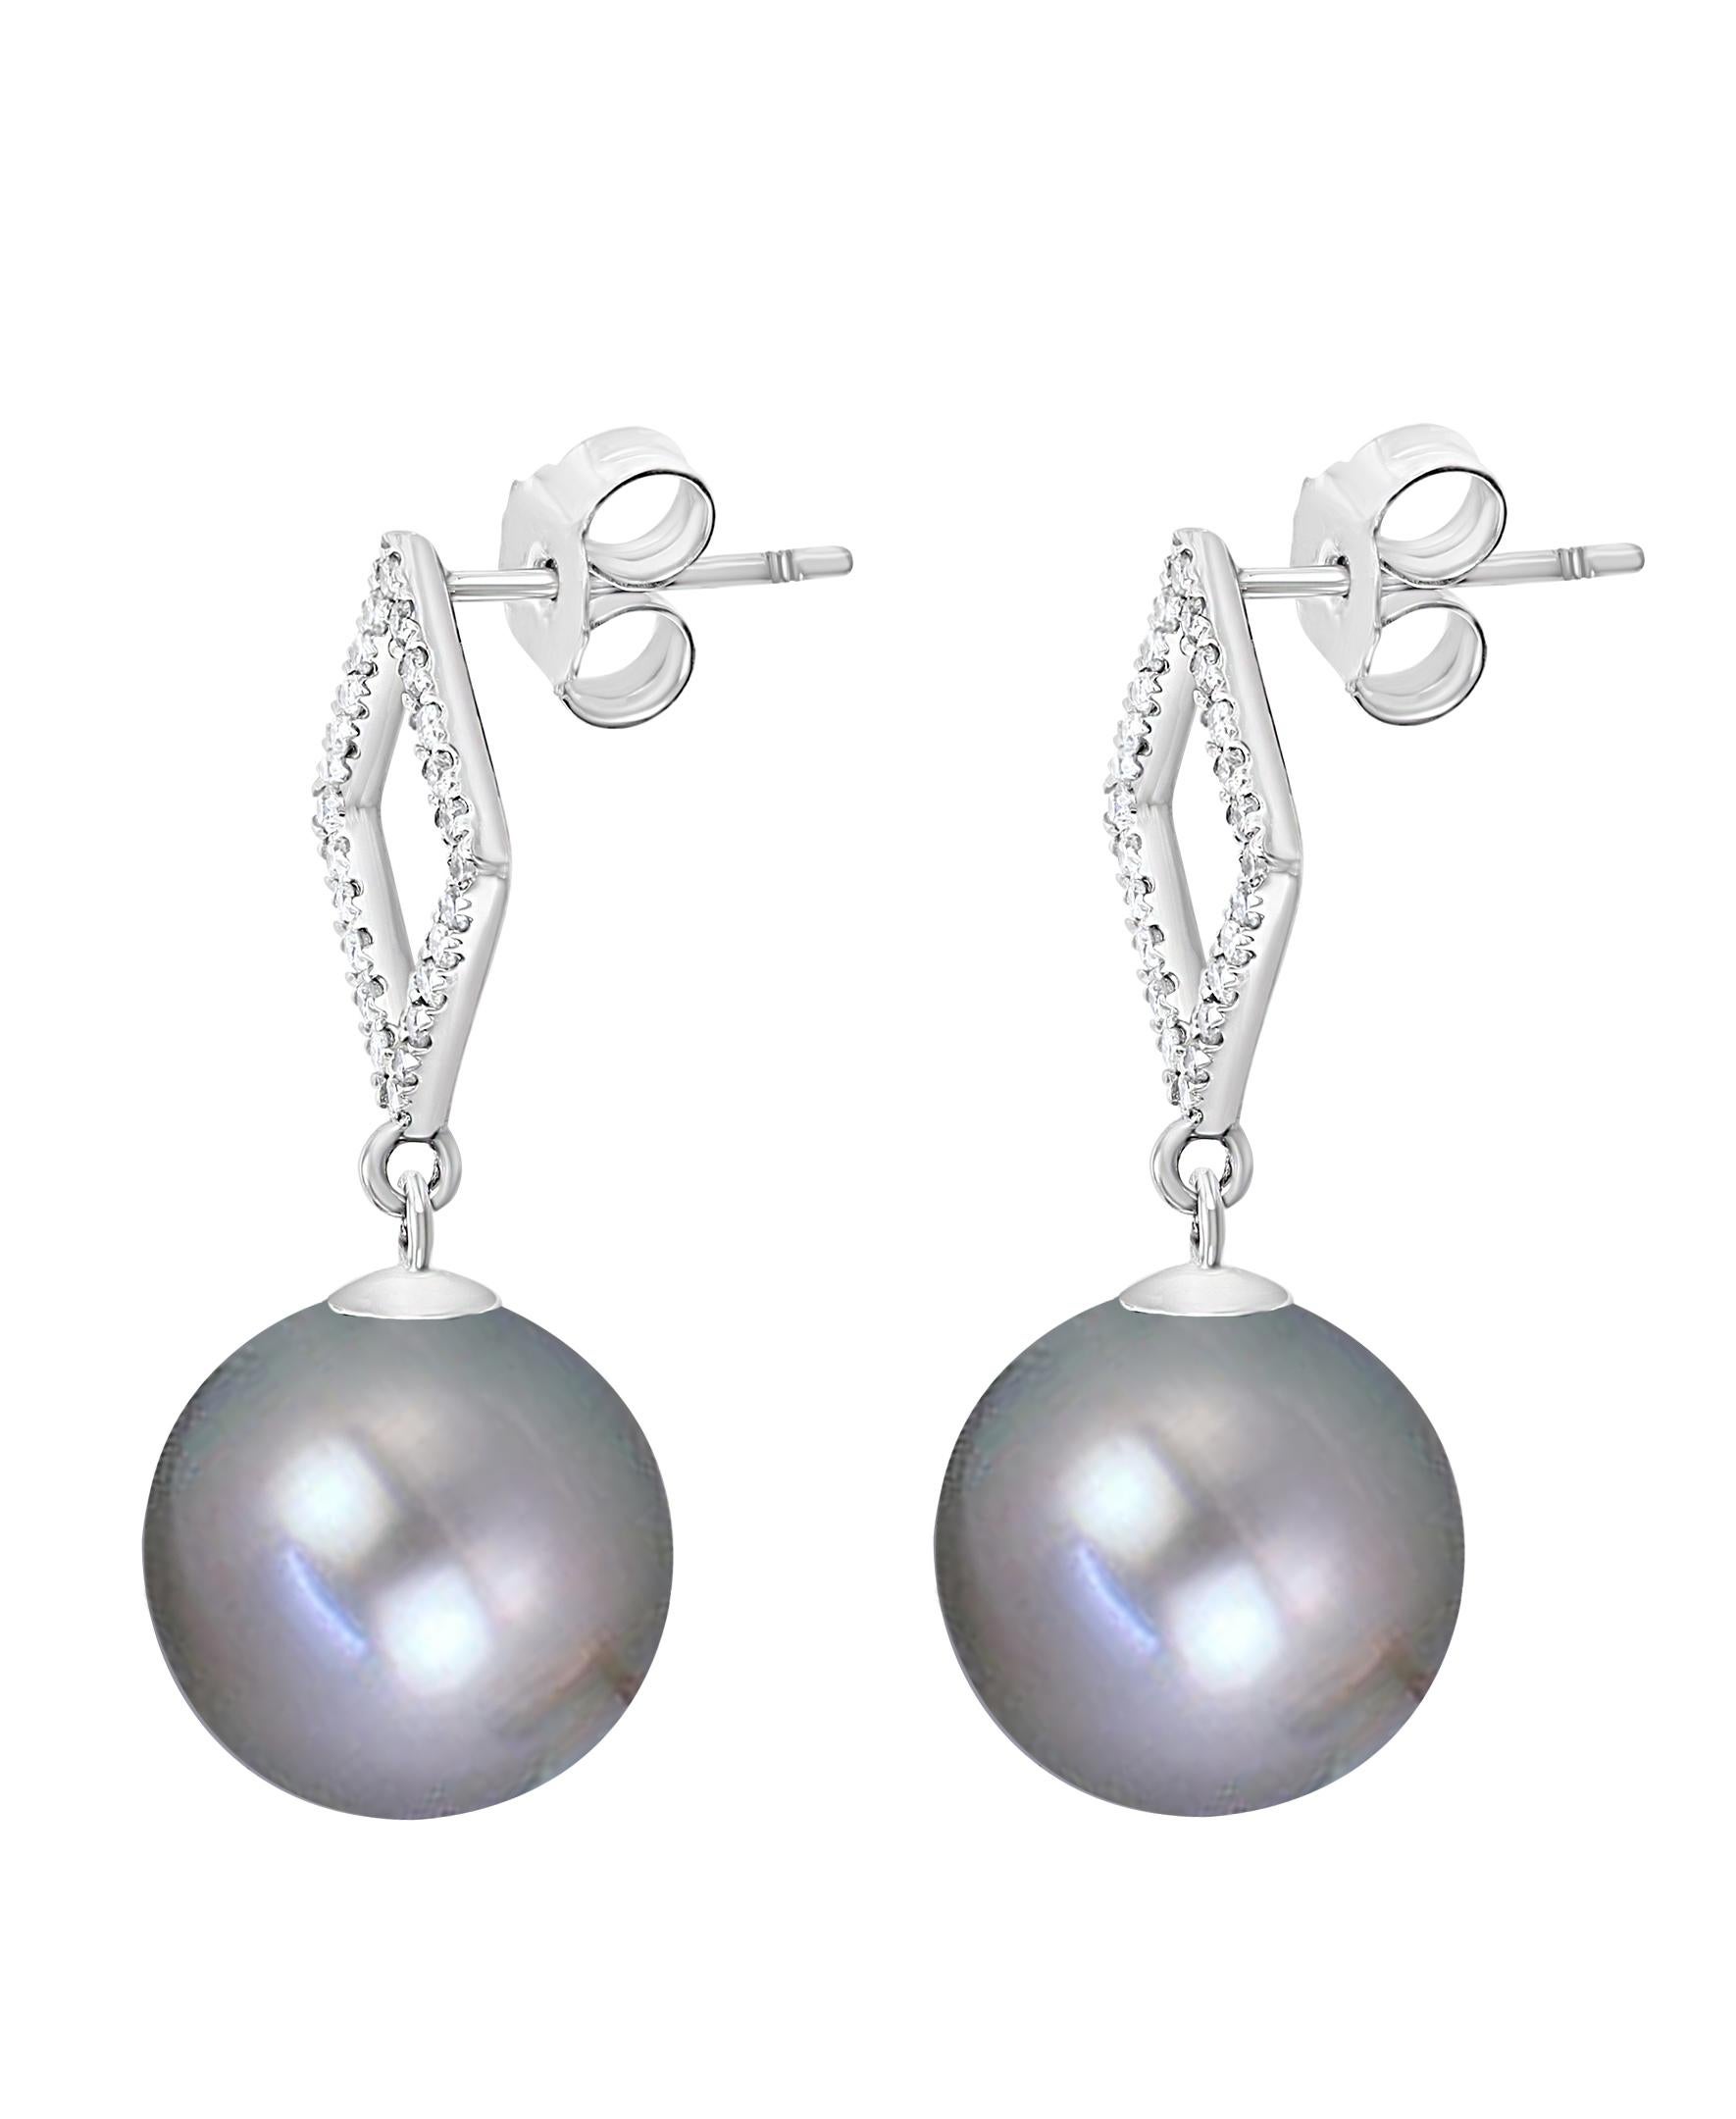 These elegant Diamond and Pearl earrings feature South Sea Tahitian Grey cultured pearls set tastefully on a diamond adorned white gold setting - an impeccable complement to any evening dress.
- 14K White Gold.
- 0.36 Carats of Diamonds. 
- Pearls